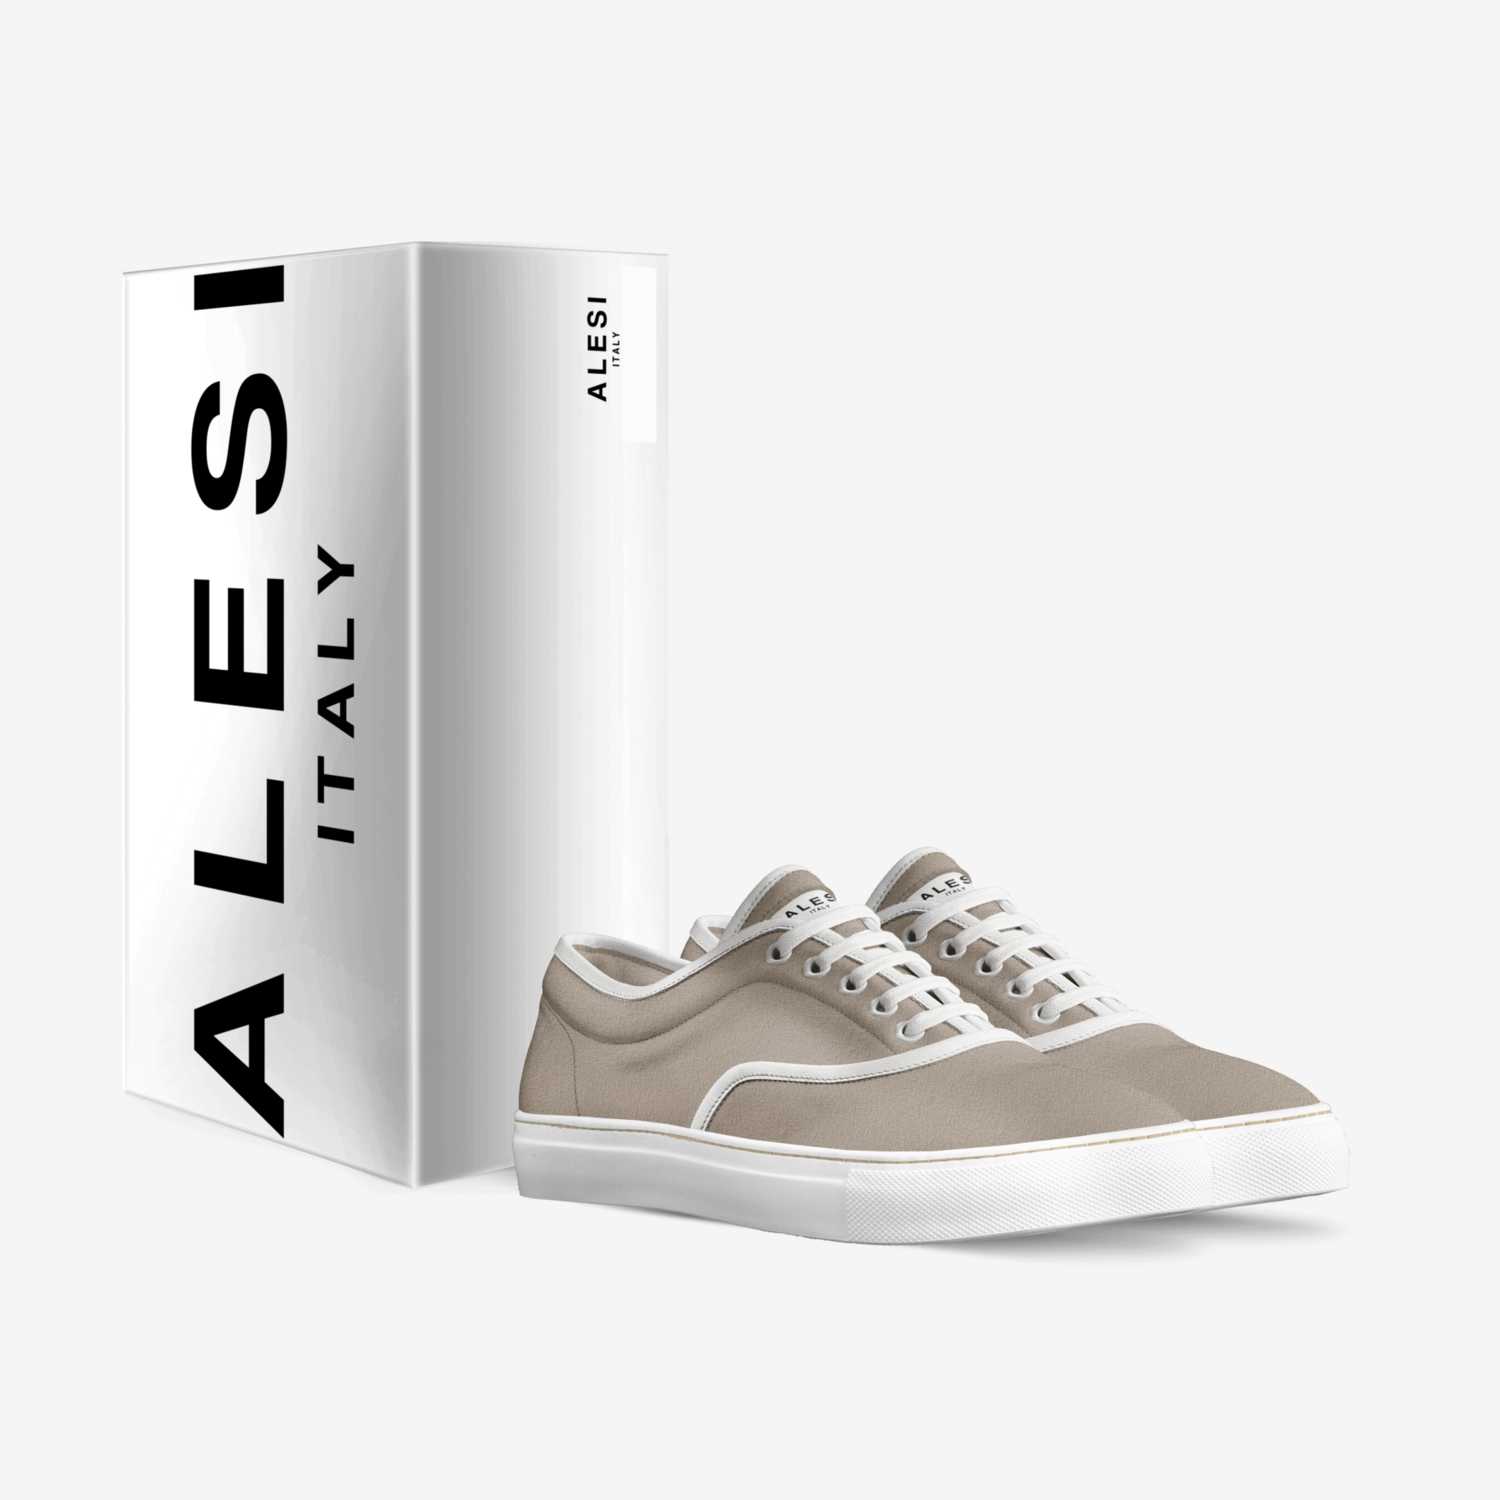 Alesi Skater custom made in Italy shoes by Lonanthony Parker | Box view